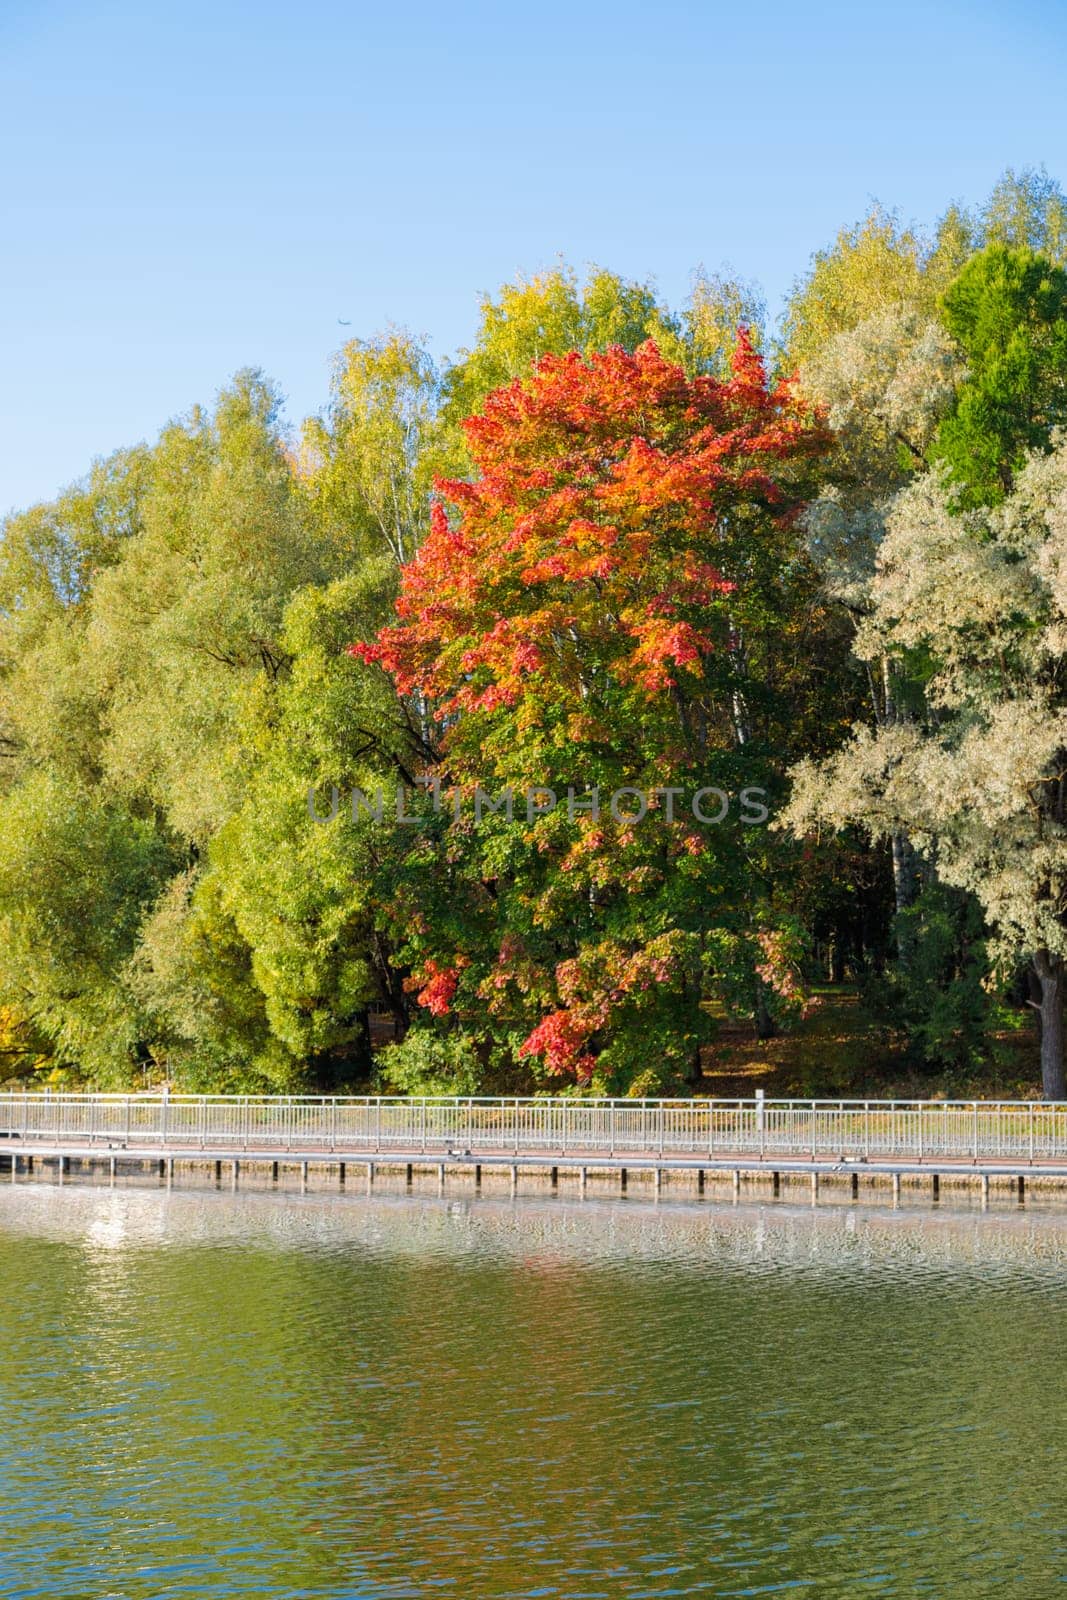 A magnificent autumn city park with a pond attracts with its peaceful atmosphere and natural beauty